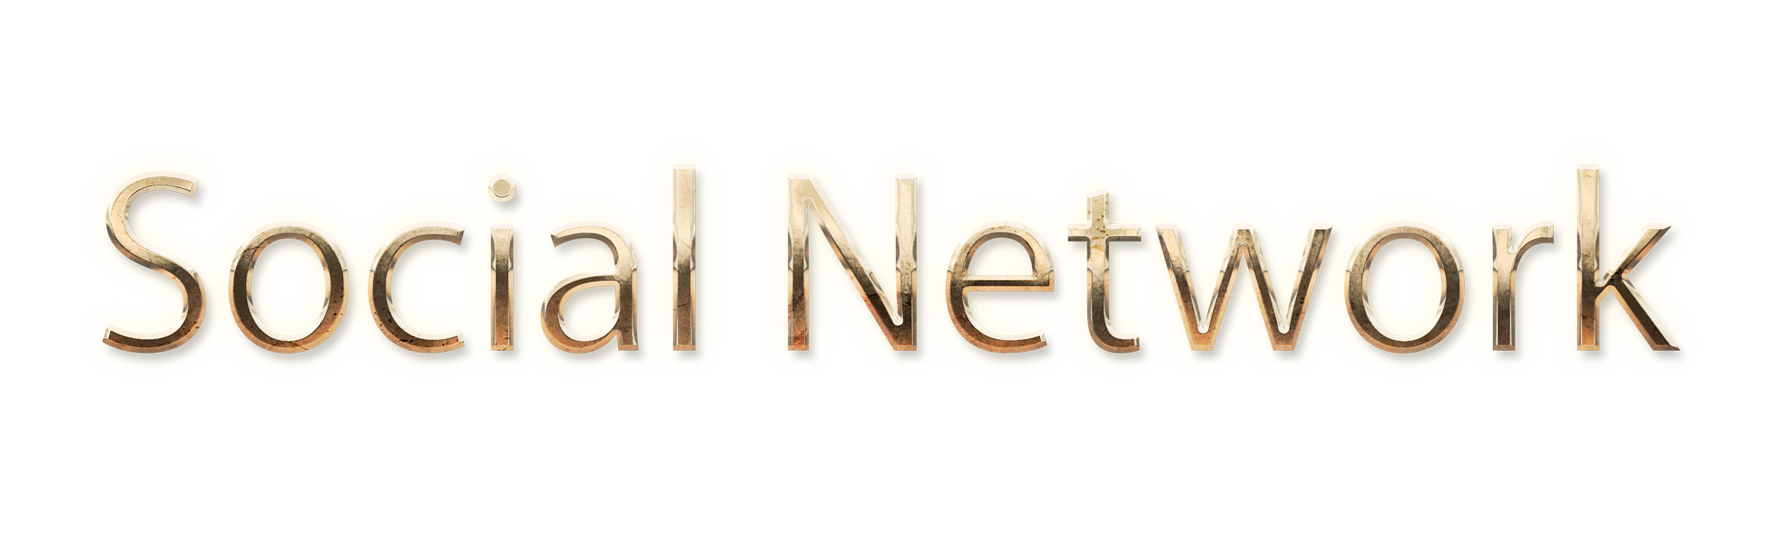 WORD SOCIAL NETWORK gold text typography PNG images free